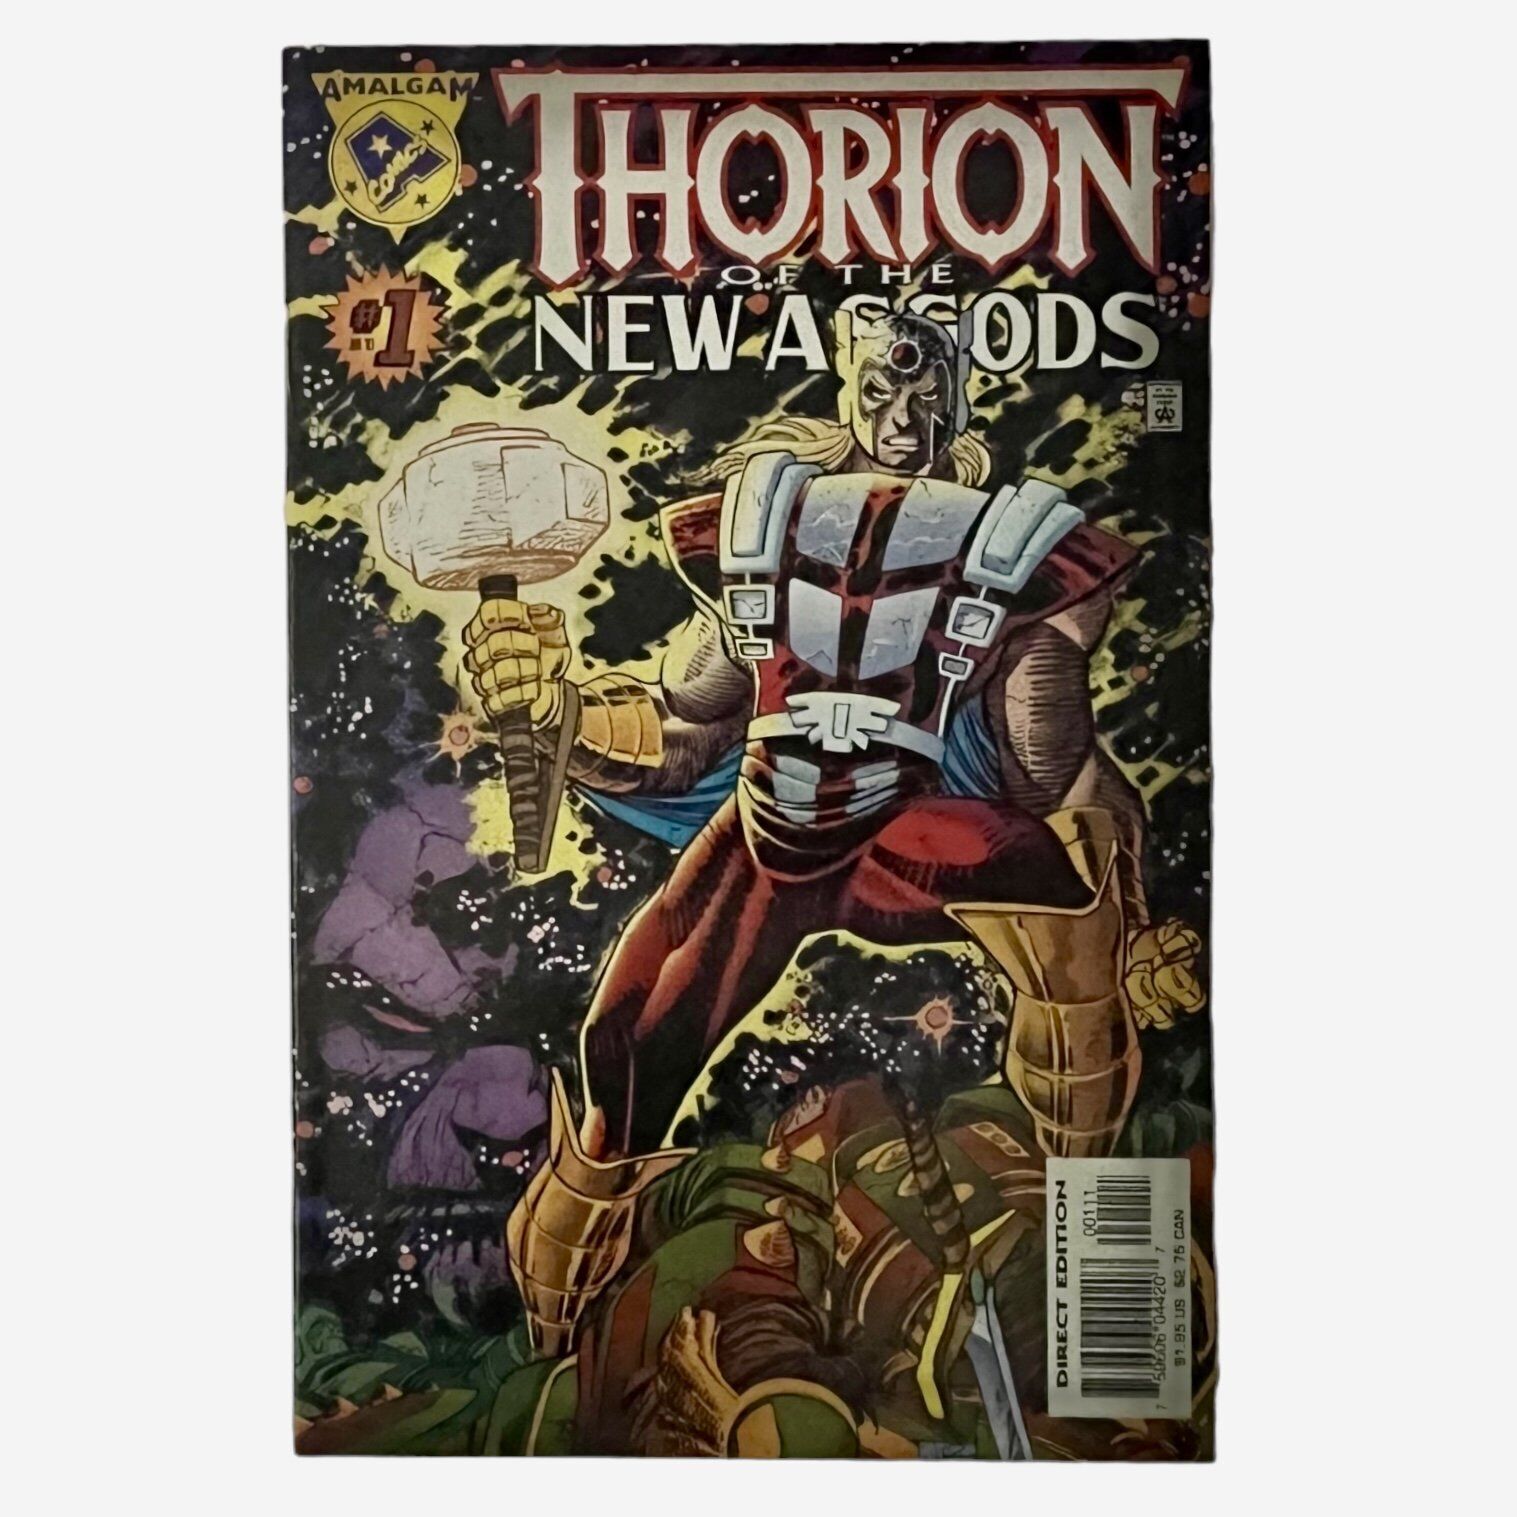 Thorion of the New Asgods #1 Direct Edition Cover (1997) Amalgam Comics